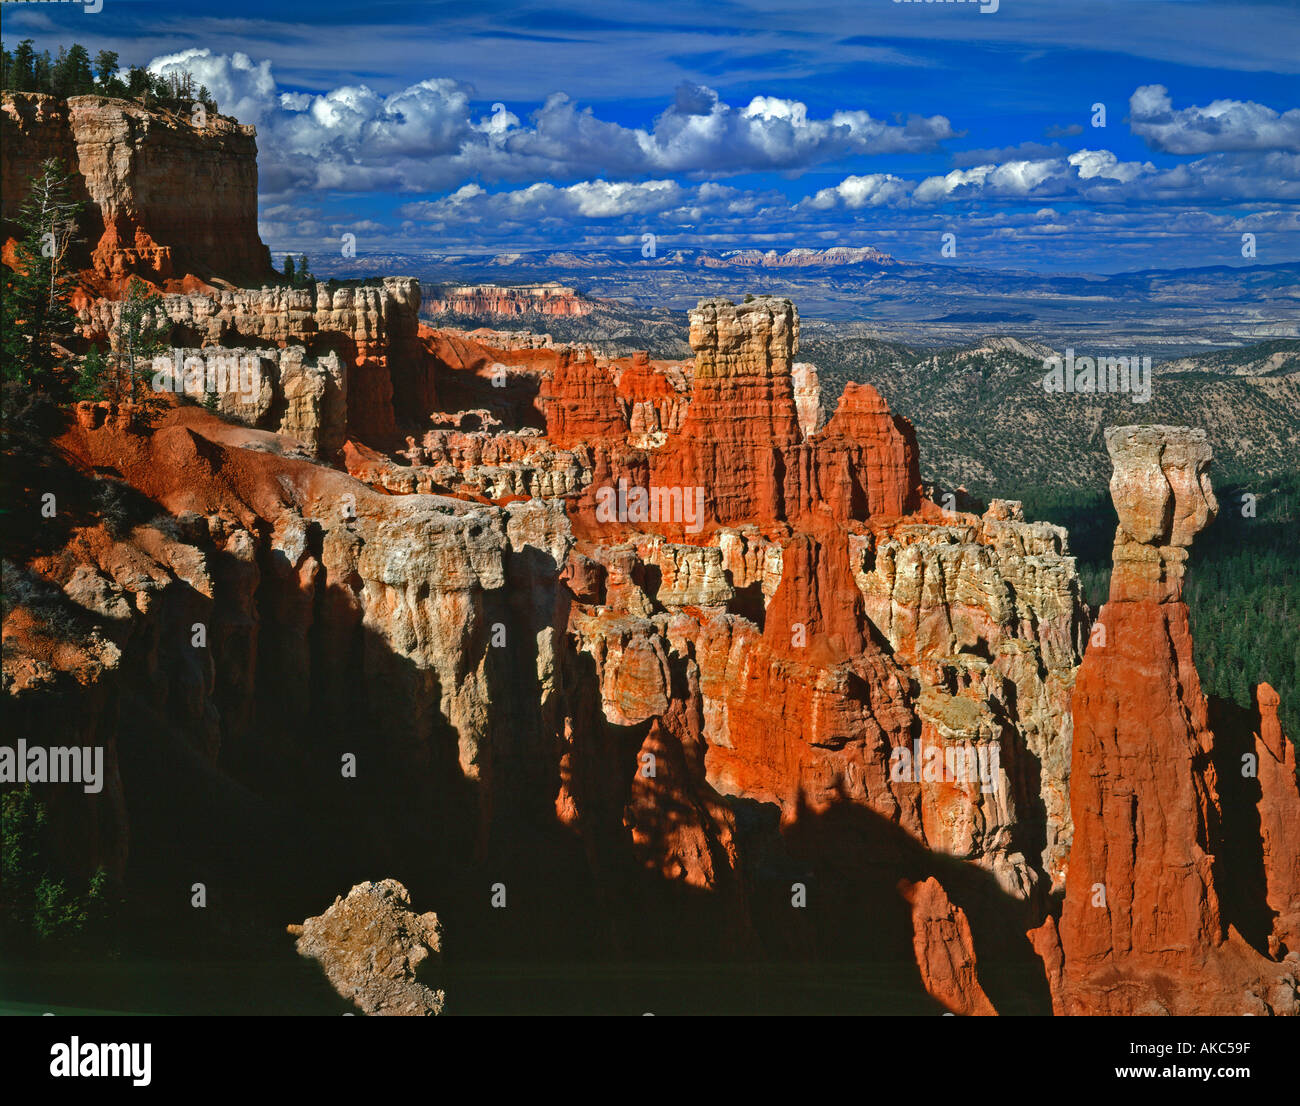 Bryce Canyon National Park in Utah showing a view of Agua Canyon with its colorful wind and water sculpted figures Stock Photo